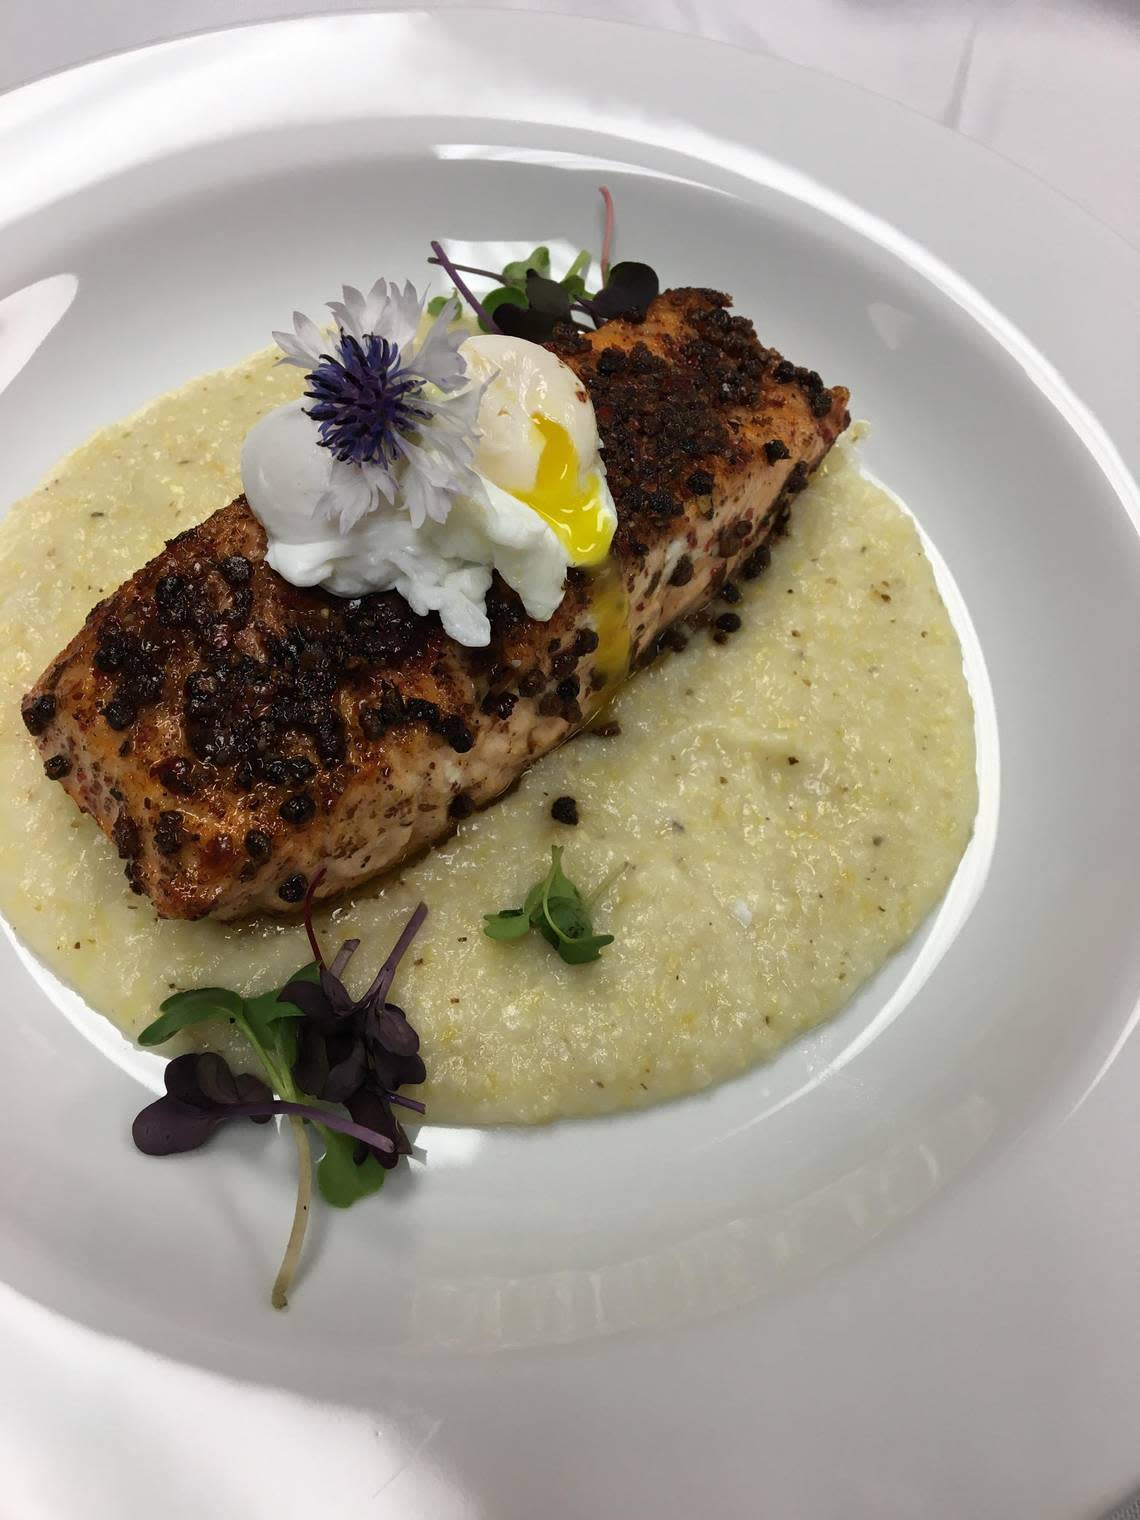 A pink peppercorn crusted salmon with grits and a poached quail egg, a catering food option from Root 76 Cuisine.